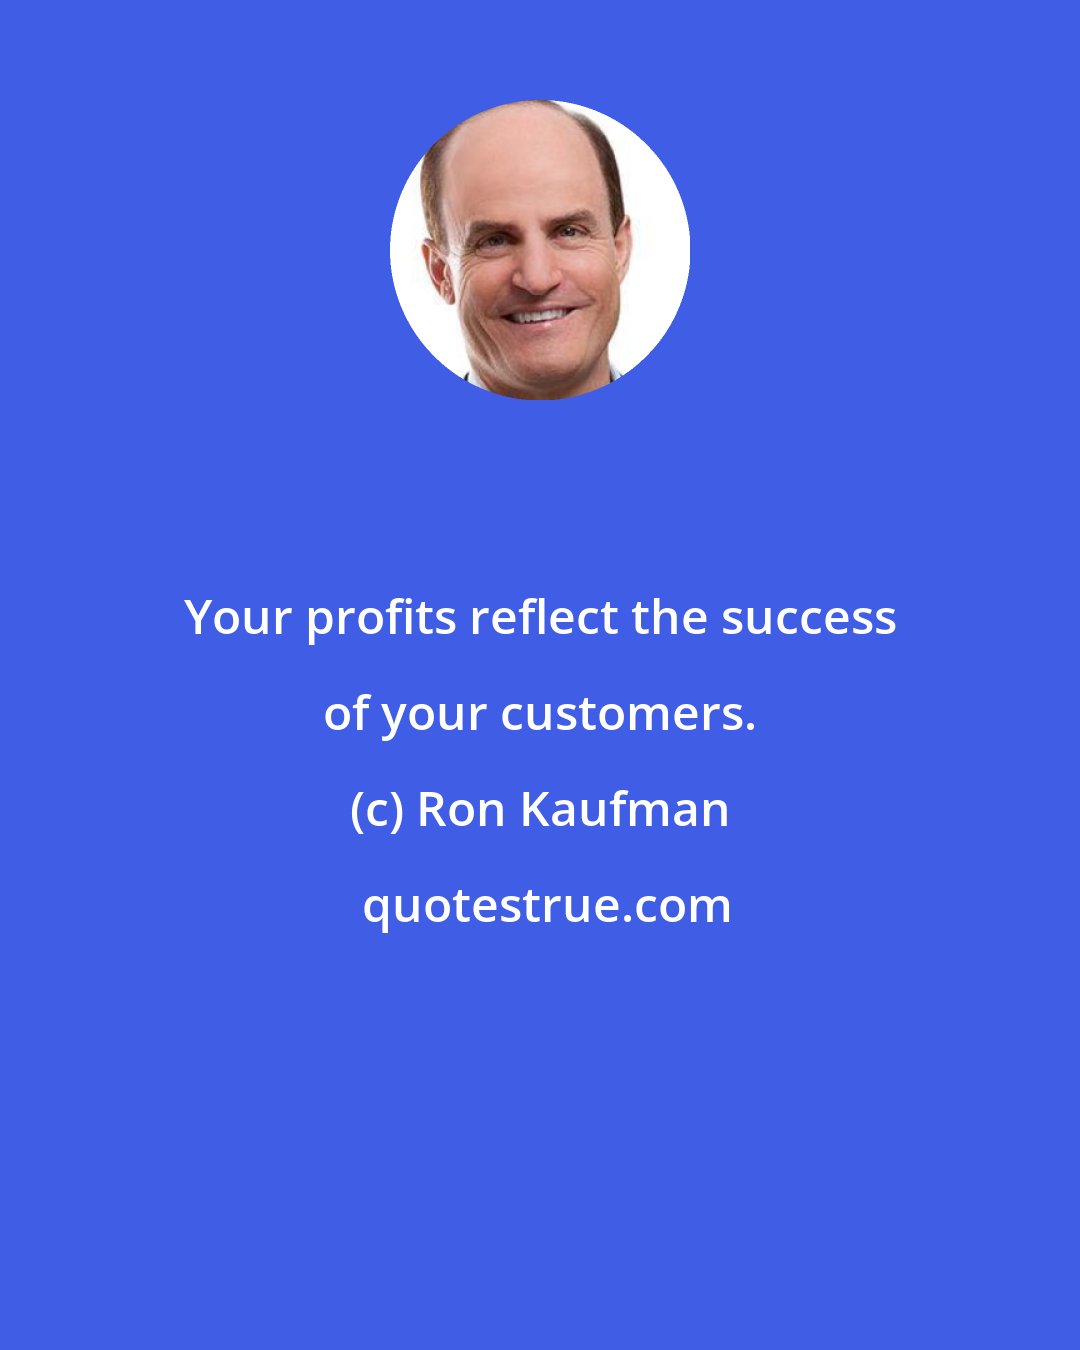 Ron Kaufman: Your profits reflect the success of your customers.